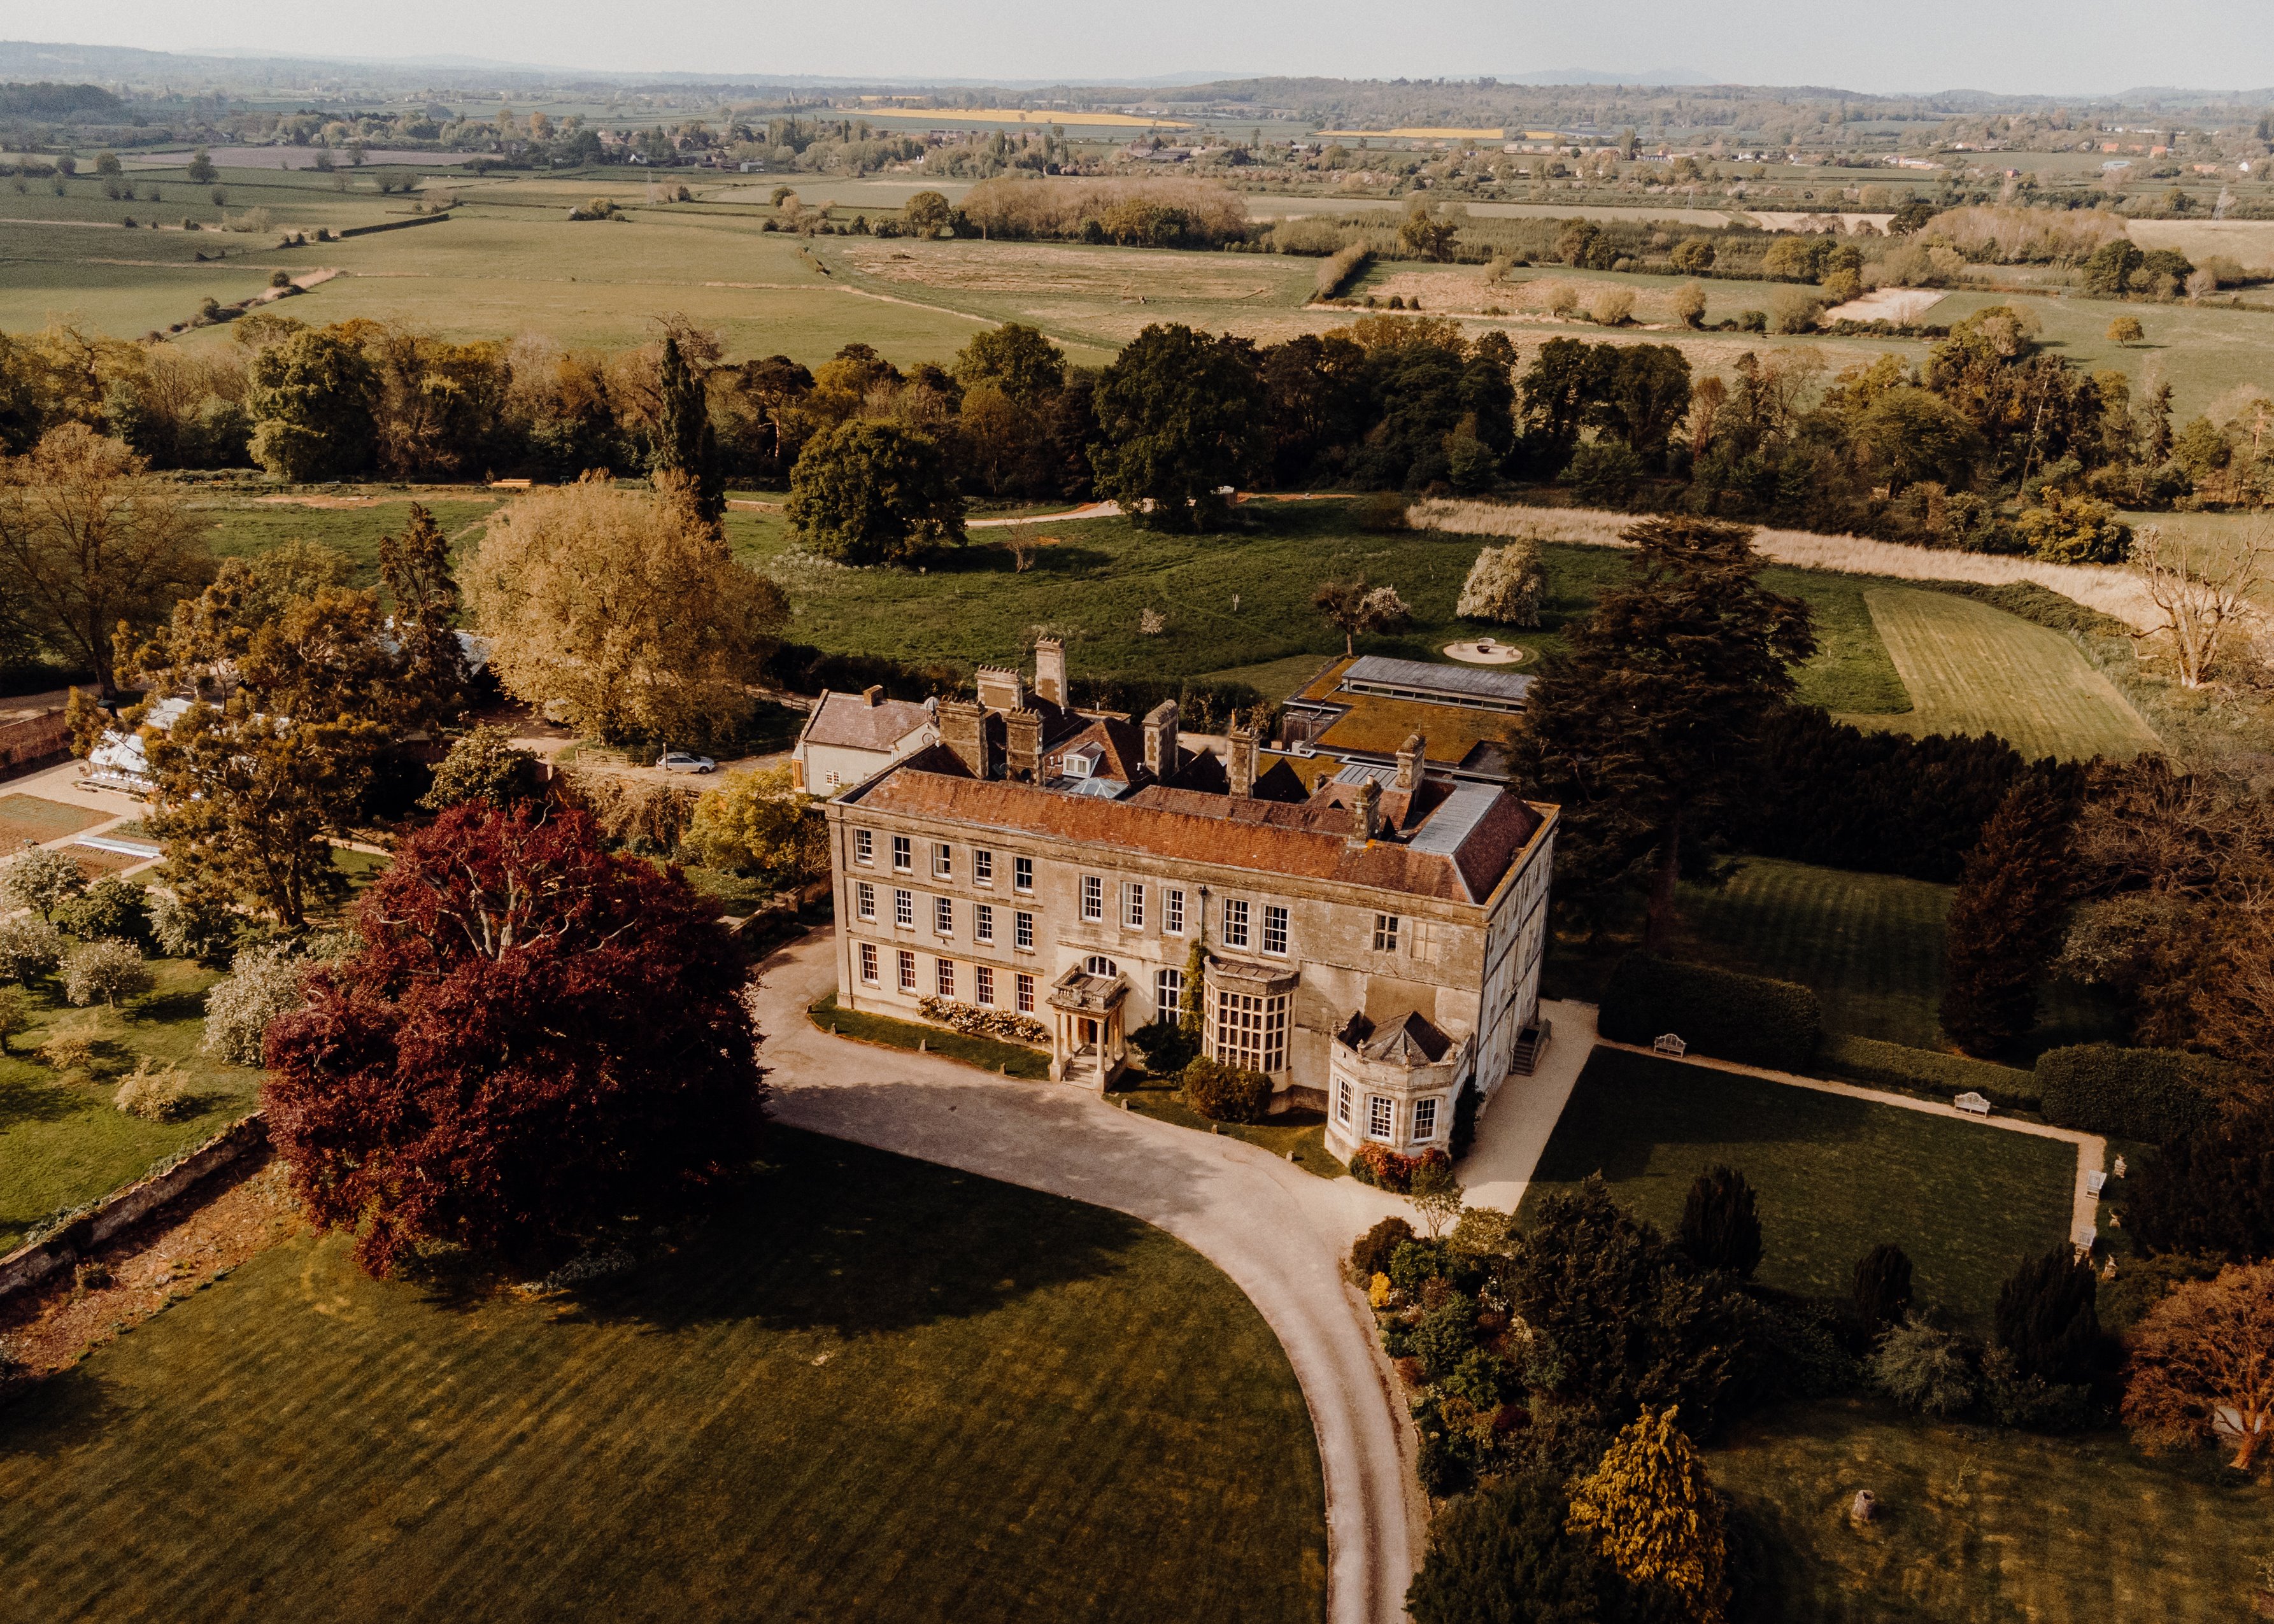 Cotswolds countryside wedding venue estate from above with rolling hills, lush fields and walled garden all around with exlcusive use and weekend weddings available